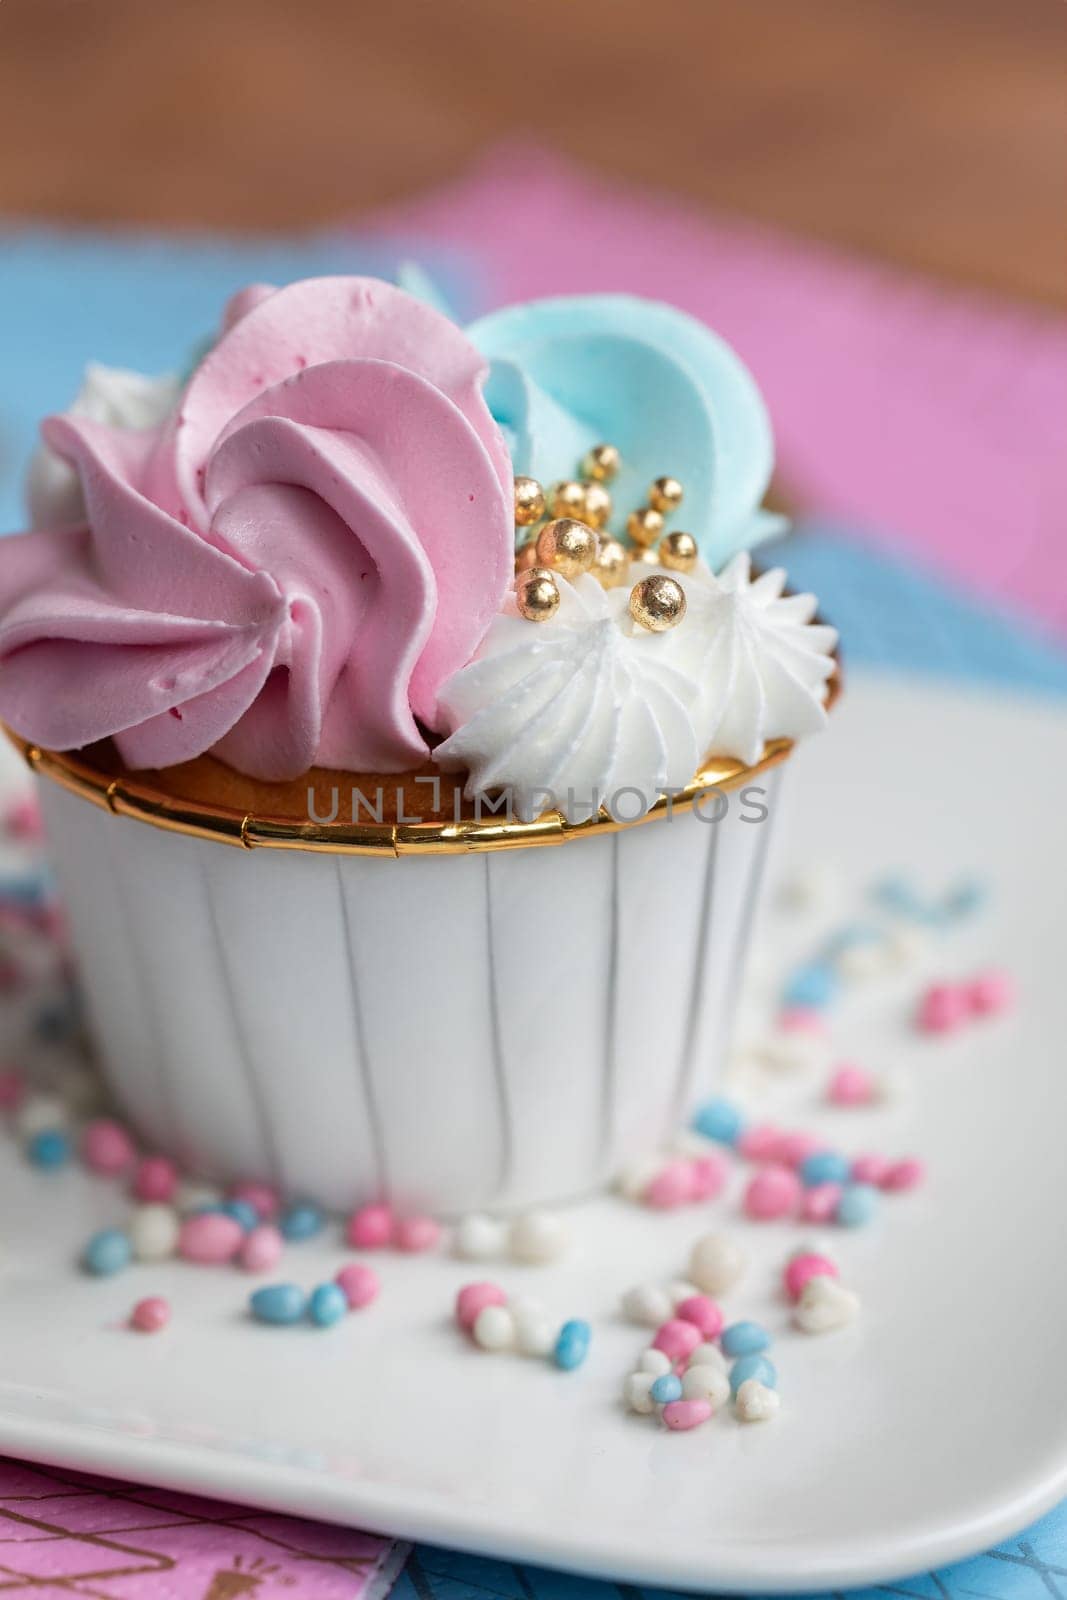 Cupcake blue and pink for gender party. boy or girl. delicious cupcakes with blue and pink cream, golden sparkles celebration concept when the gender of the child becomes known. Festive baby shower sweets concept by Annebel146